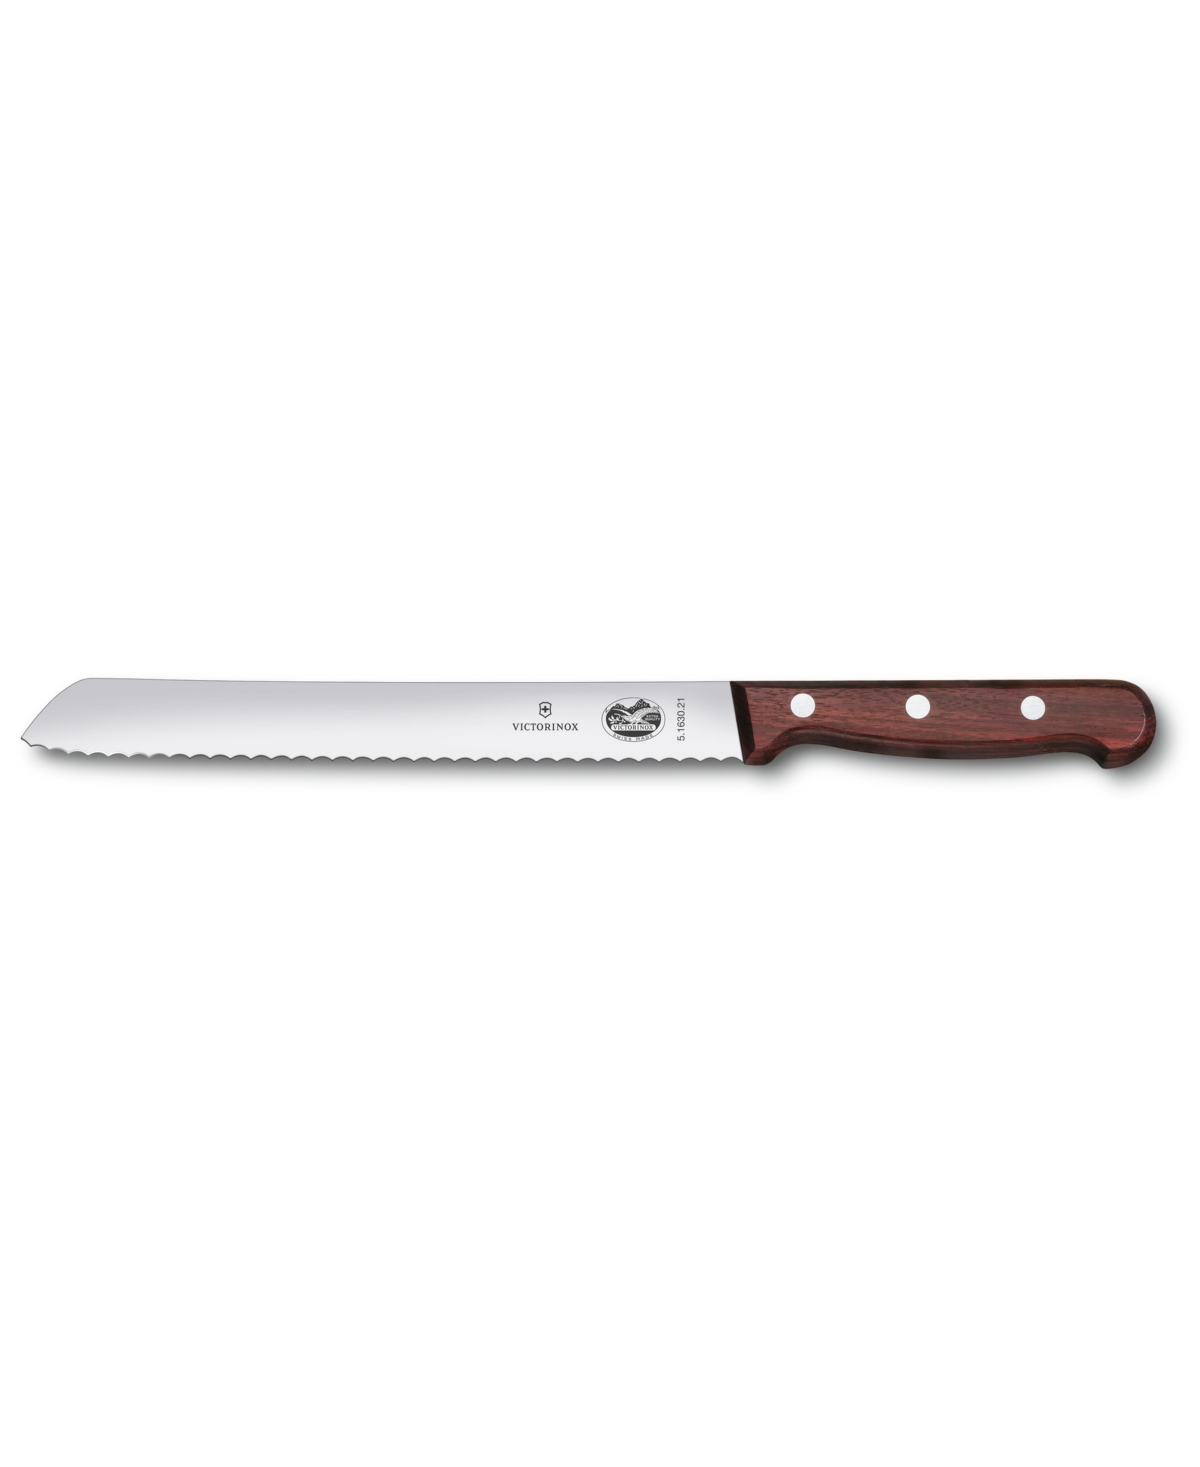 Victorinox Stainless Steel 8.3" Bread Knife With Wood Handle